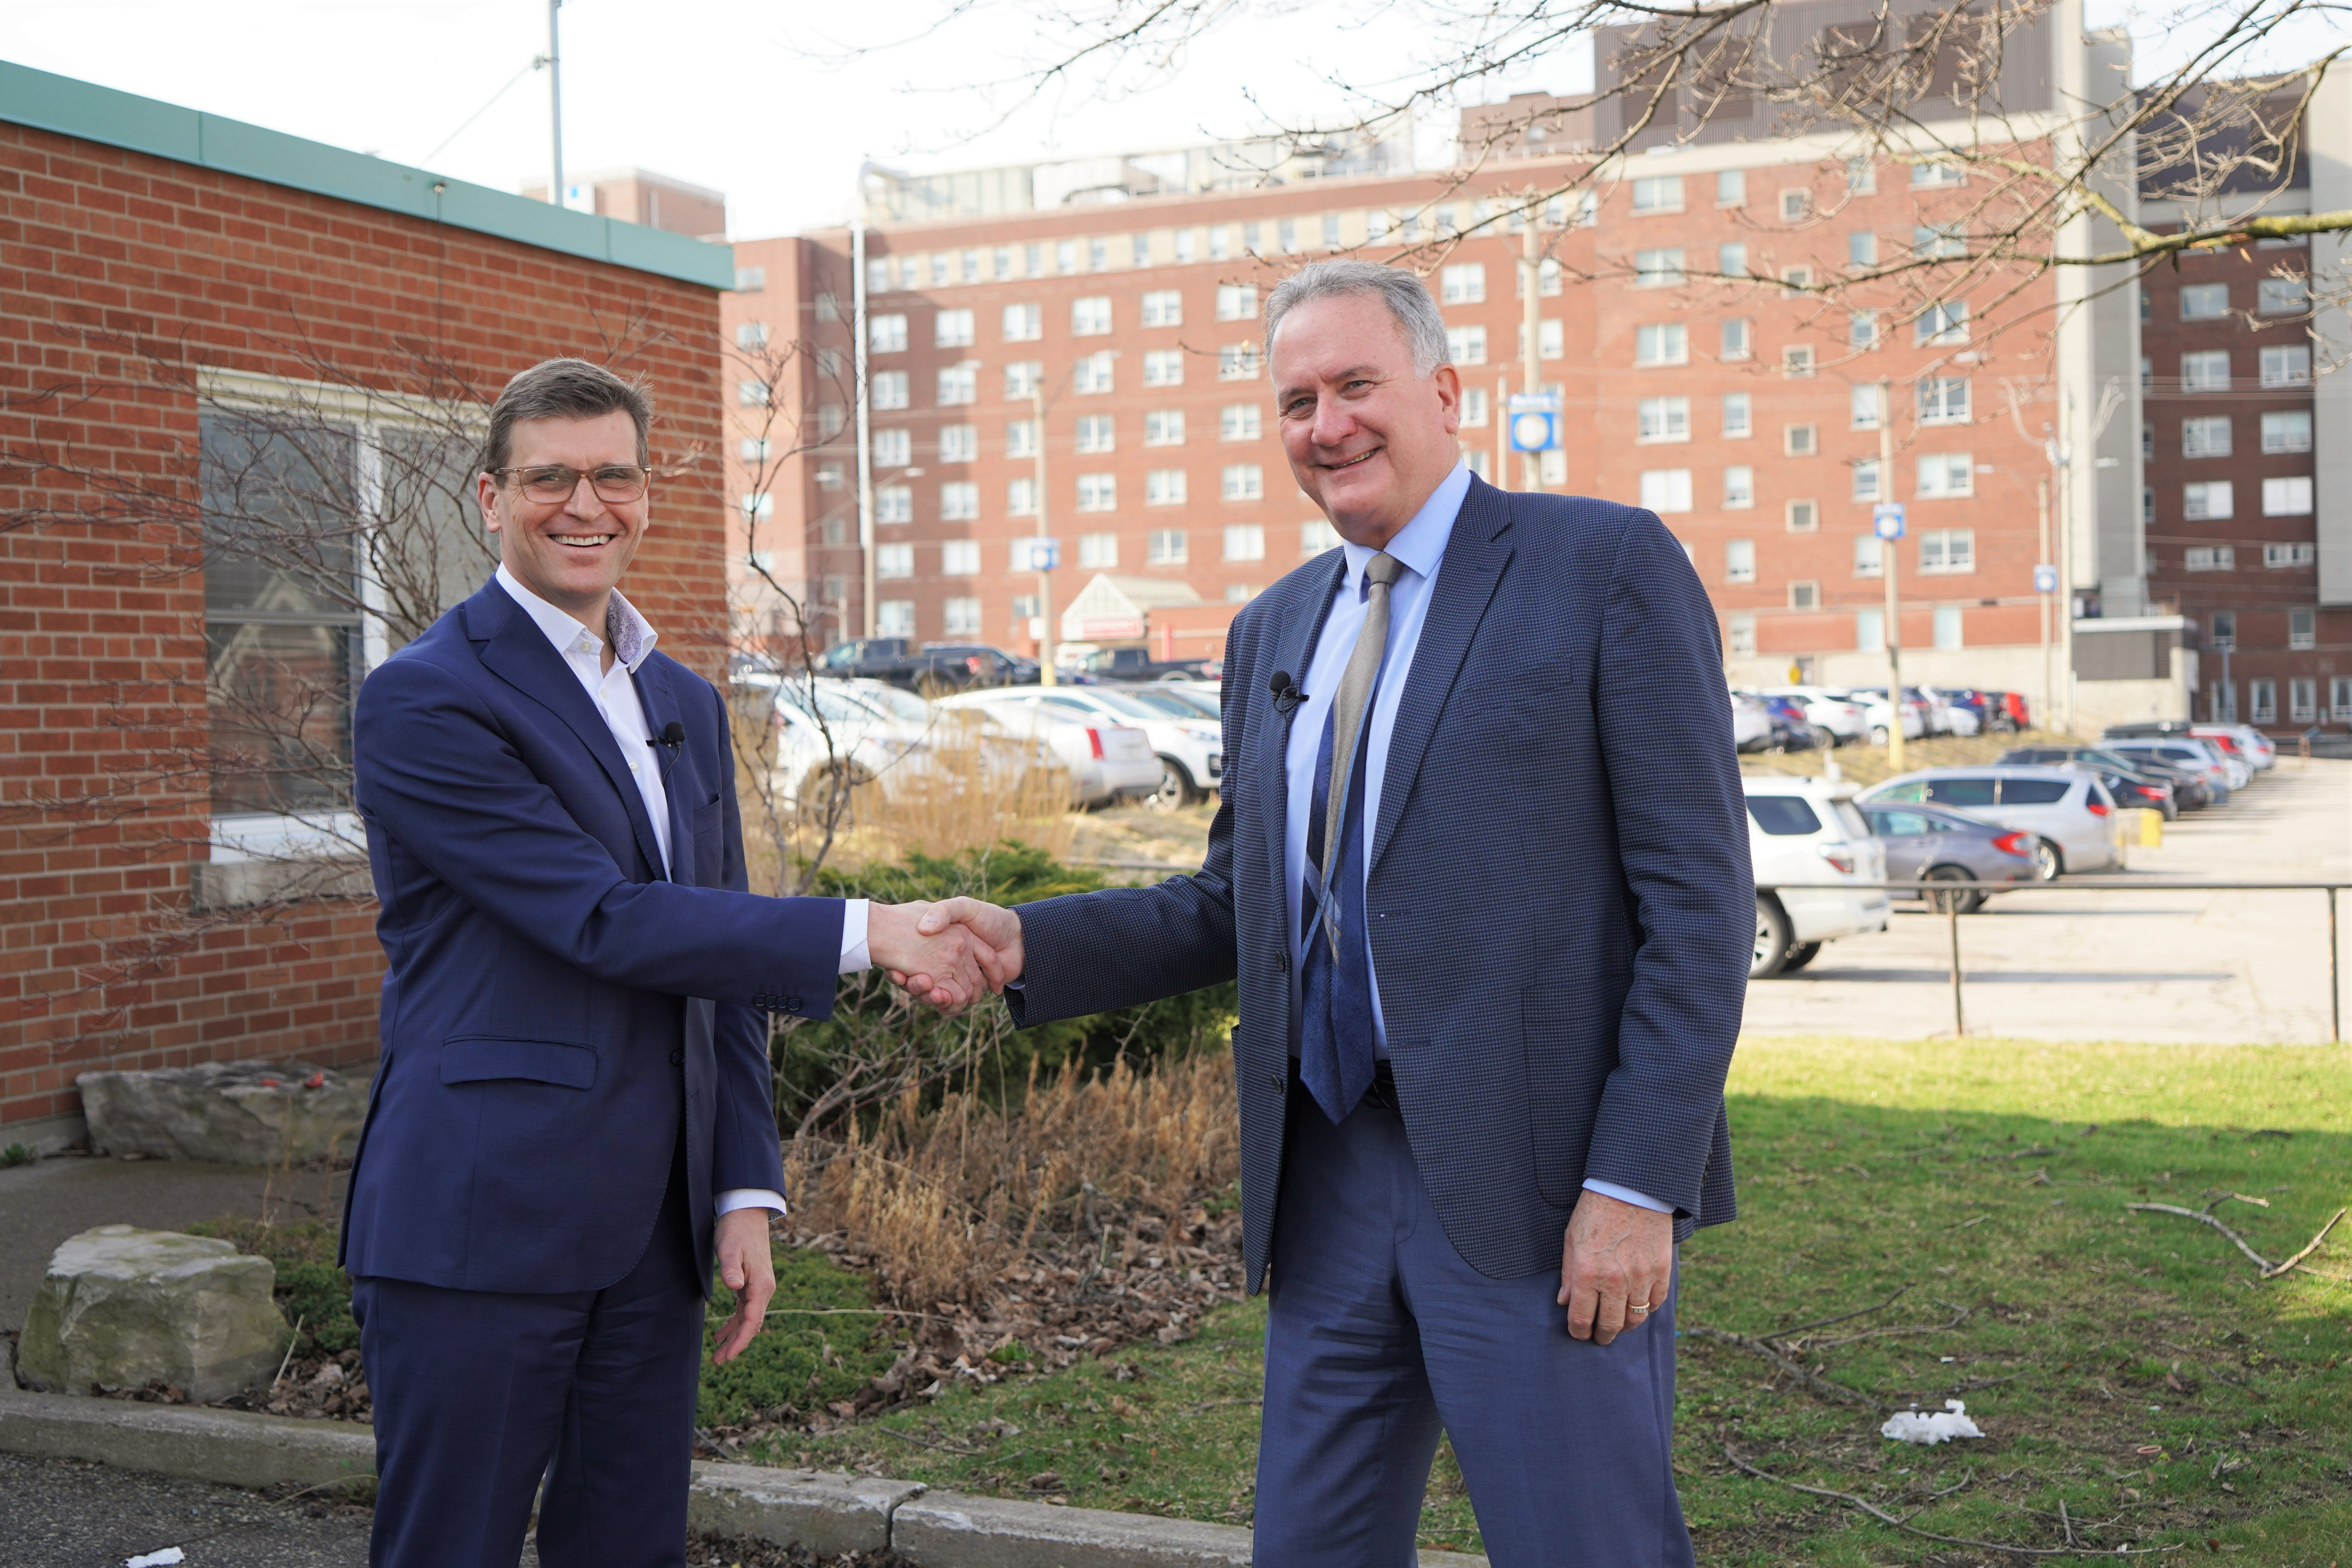 David McNeil (left), president and CEO of the Brant Community Healthcare System, and Brantford Mayor Kevin Davis on the site on St. Paul Avenue of a proposed nine-storey, 440-bed patient tower for Brantford General Hospital.